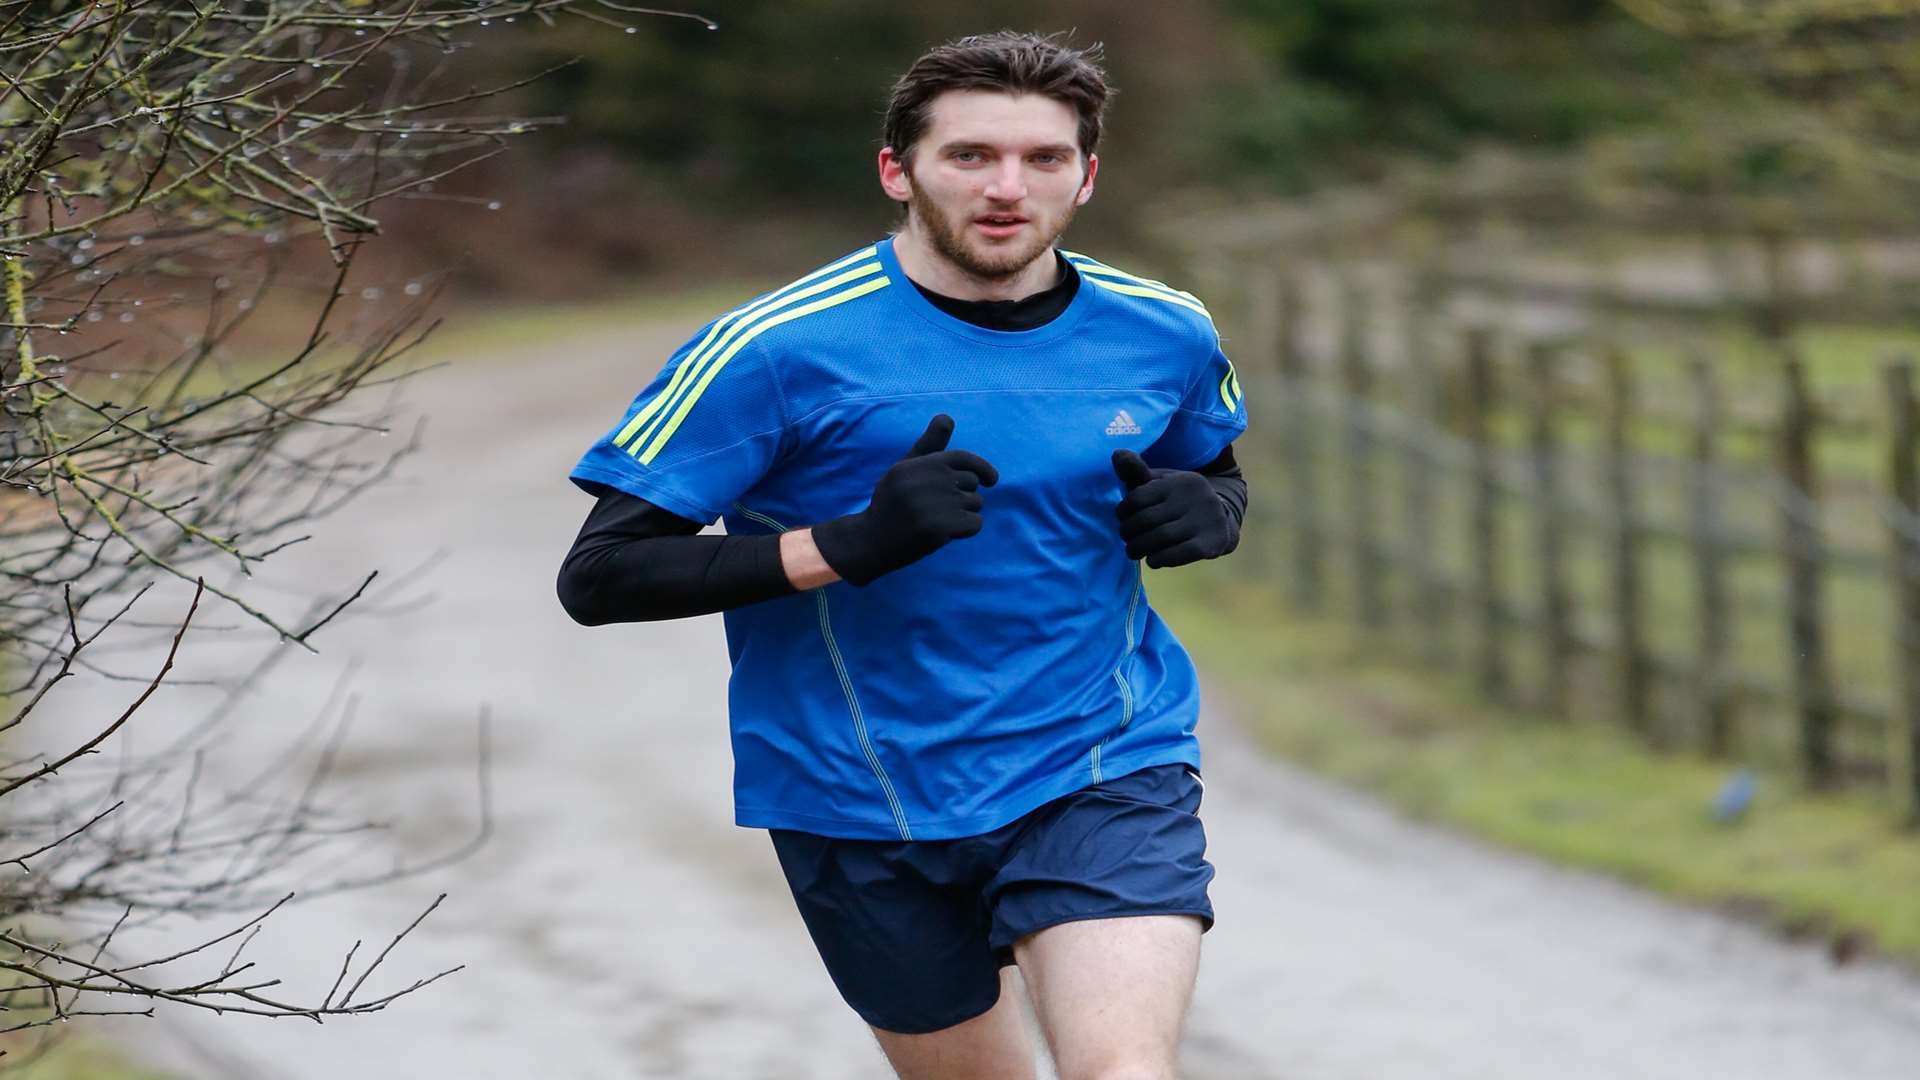 Runner Tom Carpenter came first place in the 100th parkrun in February